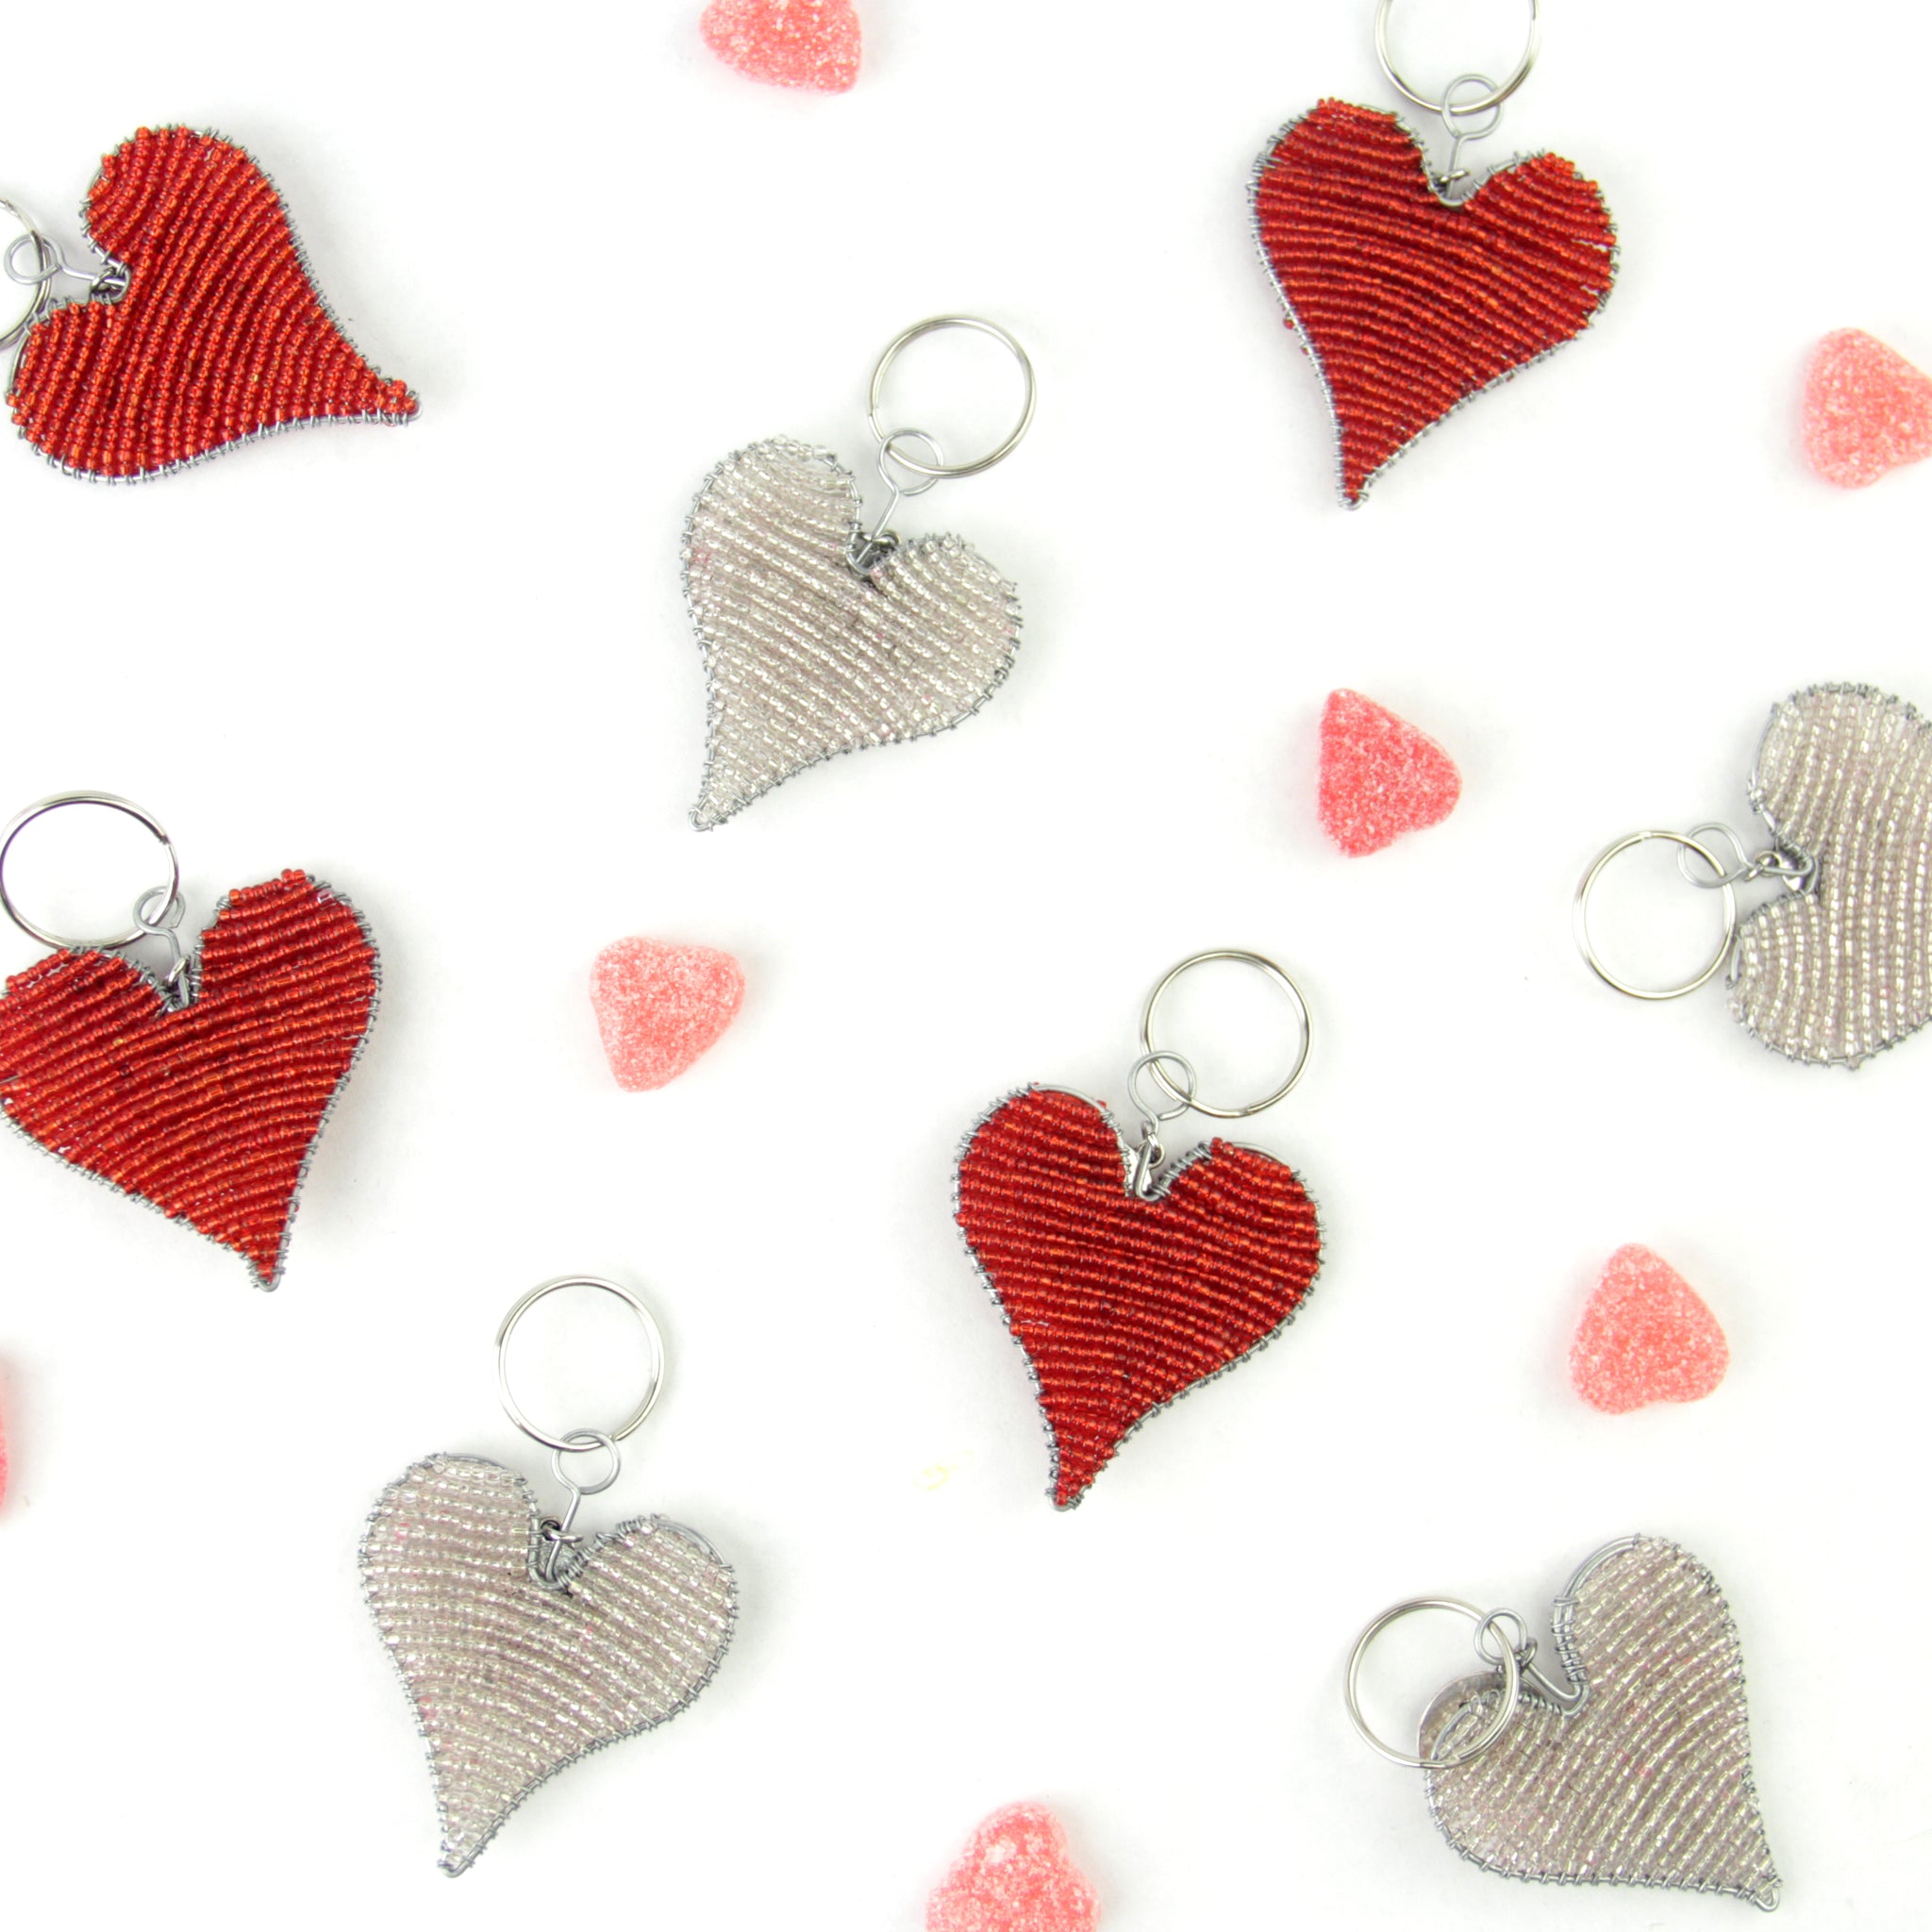 Shop for and Buy Elegant Open Heart Key Holder with Stones at Keyring.com.  Large selection and bulk discounts available.